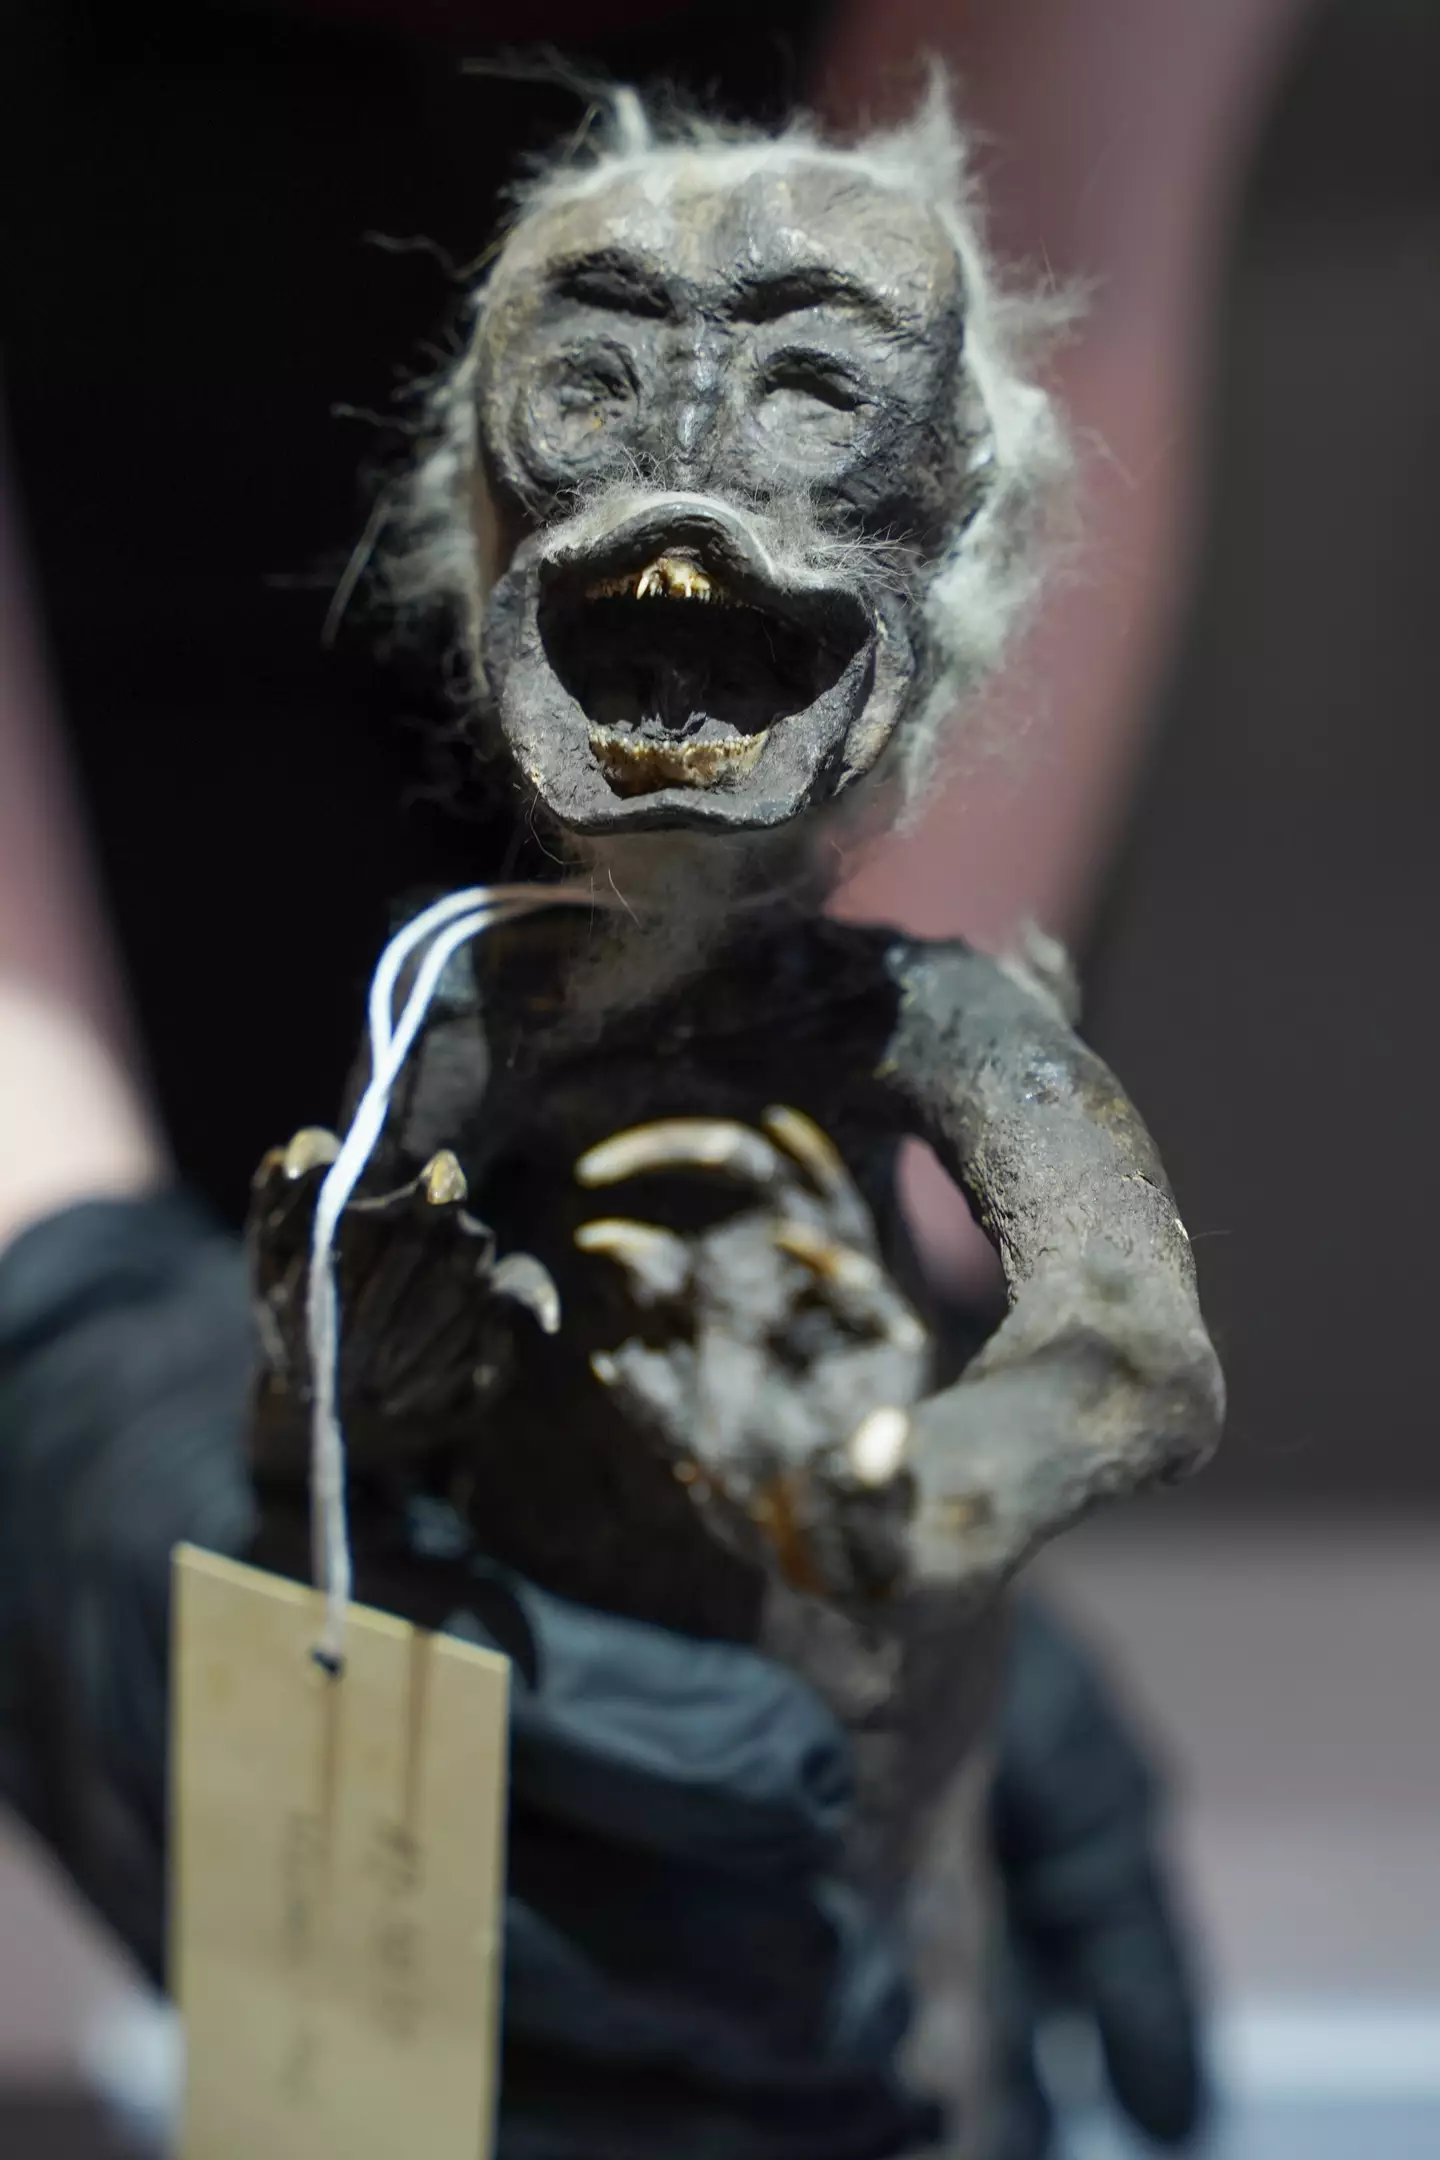 The horrifying creature is actually a 'Fiji mermaid'.